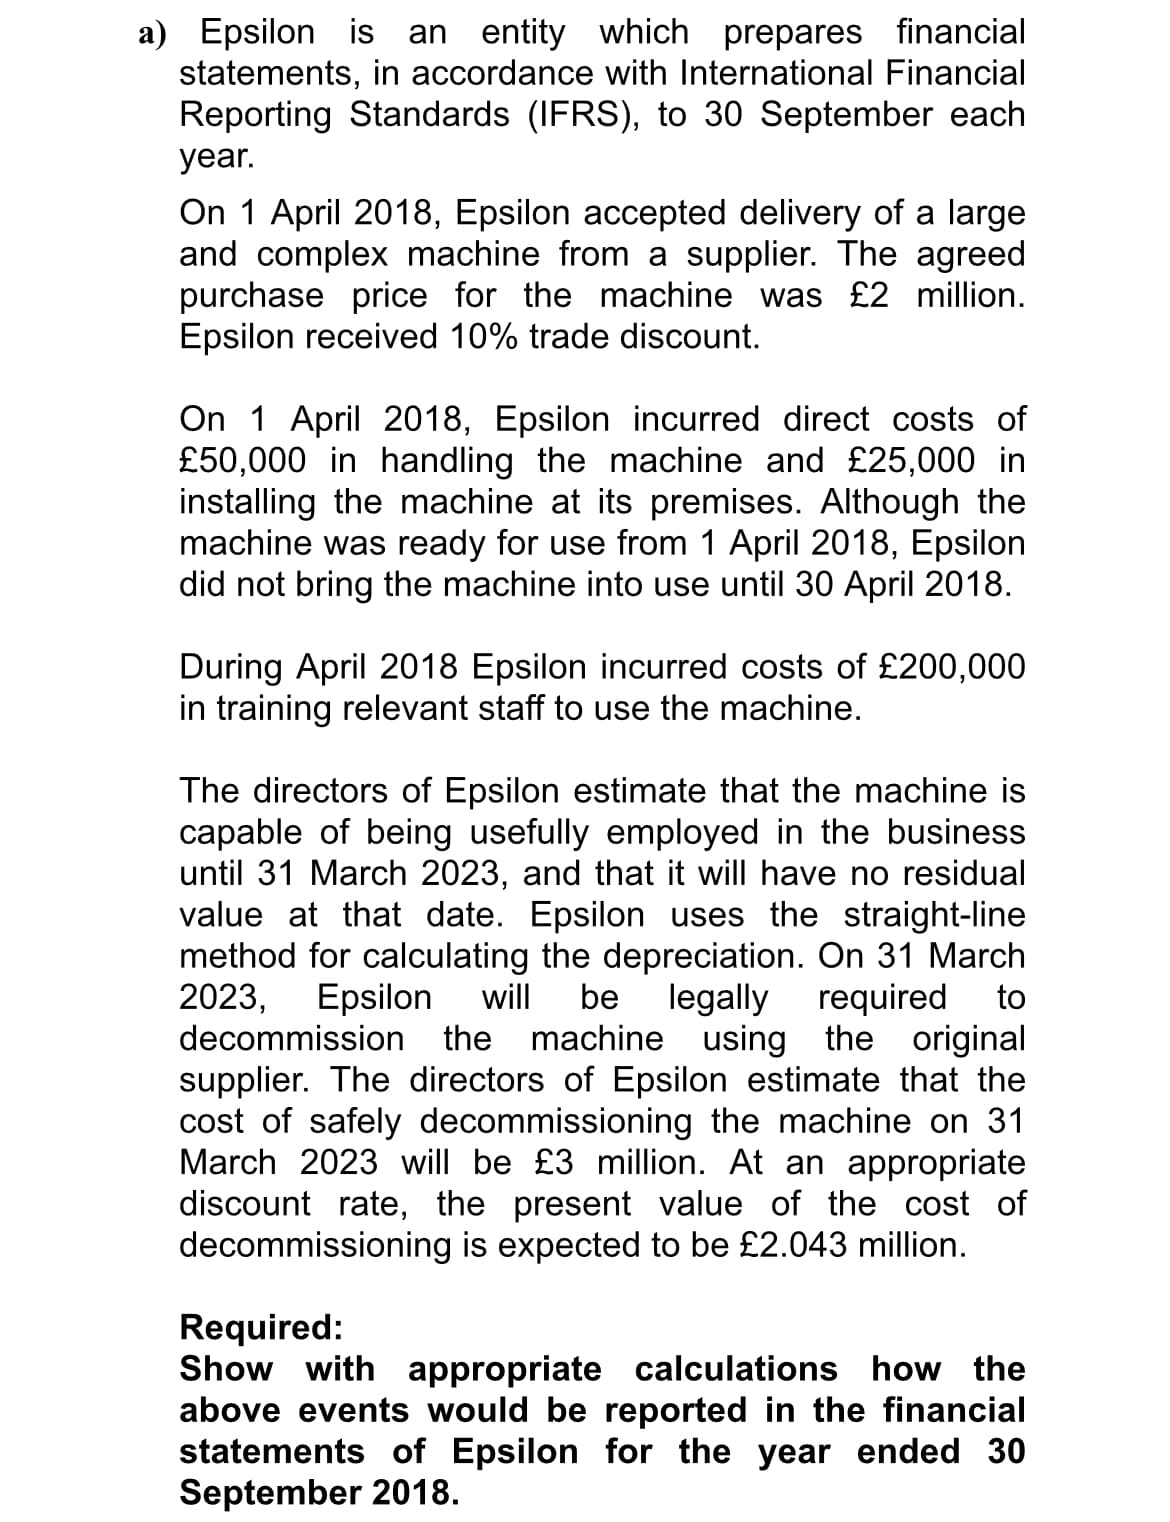 a) Epsilon is an entity which prepares financial
statements, in accordance with International Financial
Reporting Standards (IFRS), to 30 September each
year.
On 1 April 2018, Epsilon accepted delivery of a large
and complex machine from a supplier. The agreed
purchase price for the machine was £2 million.
Epsilon received 10% trade discount.
On 1 April 2018, Epsilon incurred direct costs of
£50,000 in handling the machine and £25,000 in
installing the machine at its premises. Although the
machine was ready for use from 1 April 2018, Epsilon
did not bring the machine into use until 30 April 2018.
During April 2018 Epsilon incurred costs of £200,000
in training relevant staff to use the machine.
The directors of Epsilon estimate that the machine is
capable of being usefully employed in the business
until 31 March 2023, and that it will have no residual
value at that date. Epsilon uses the straight-line
method for calculating the depreciation. On 31 March
2023,
decommission the machine using the original
supplier. The directors of Epsilon estimate that the
cost of safely decommissioning the machine on 31
March 2023 will be £3 million. At an appropriate
discount rate, the present value of the cost of
decommissioning is expected to be £2.043 million.
Epsilon will
be
legally required
to
Required:
Show with appropriate calculations how the
above events would be reported in the financial
statements of Epsilon for the year ended 30
September 2018.
